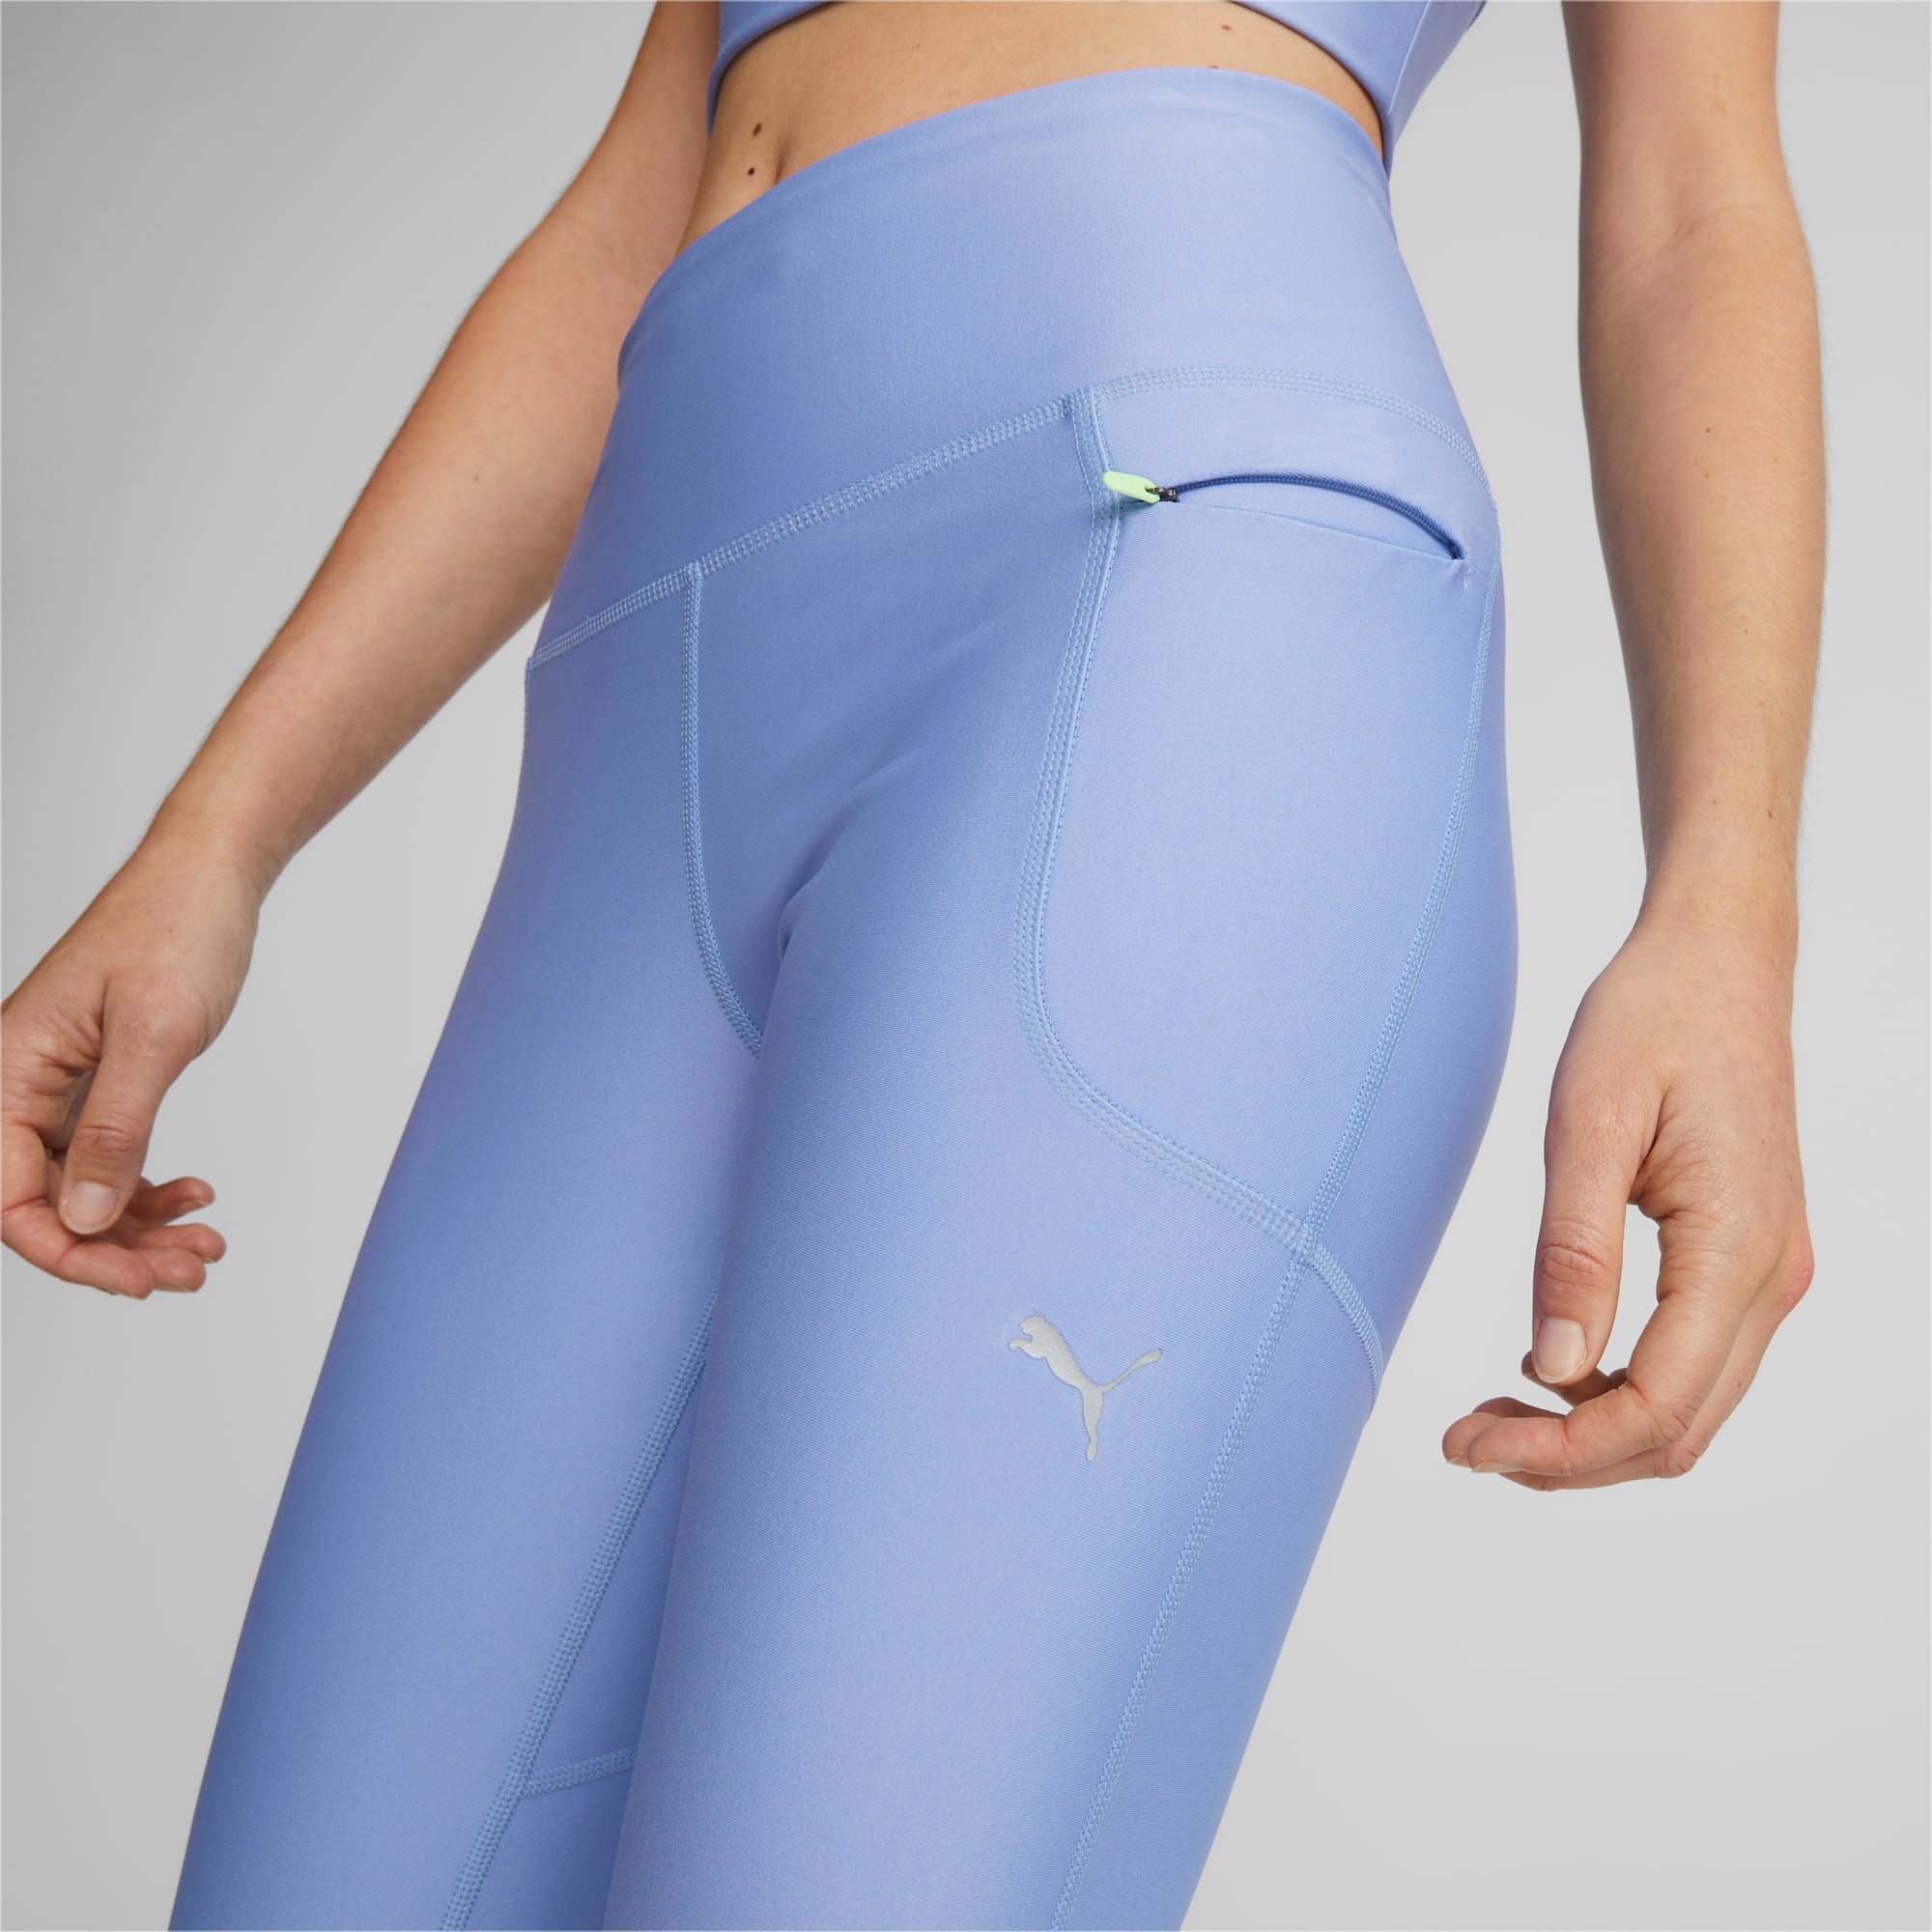 Buy Run Compression Tights 3.0 for women